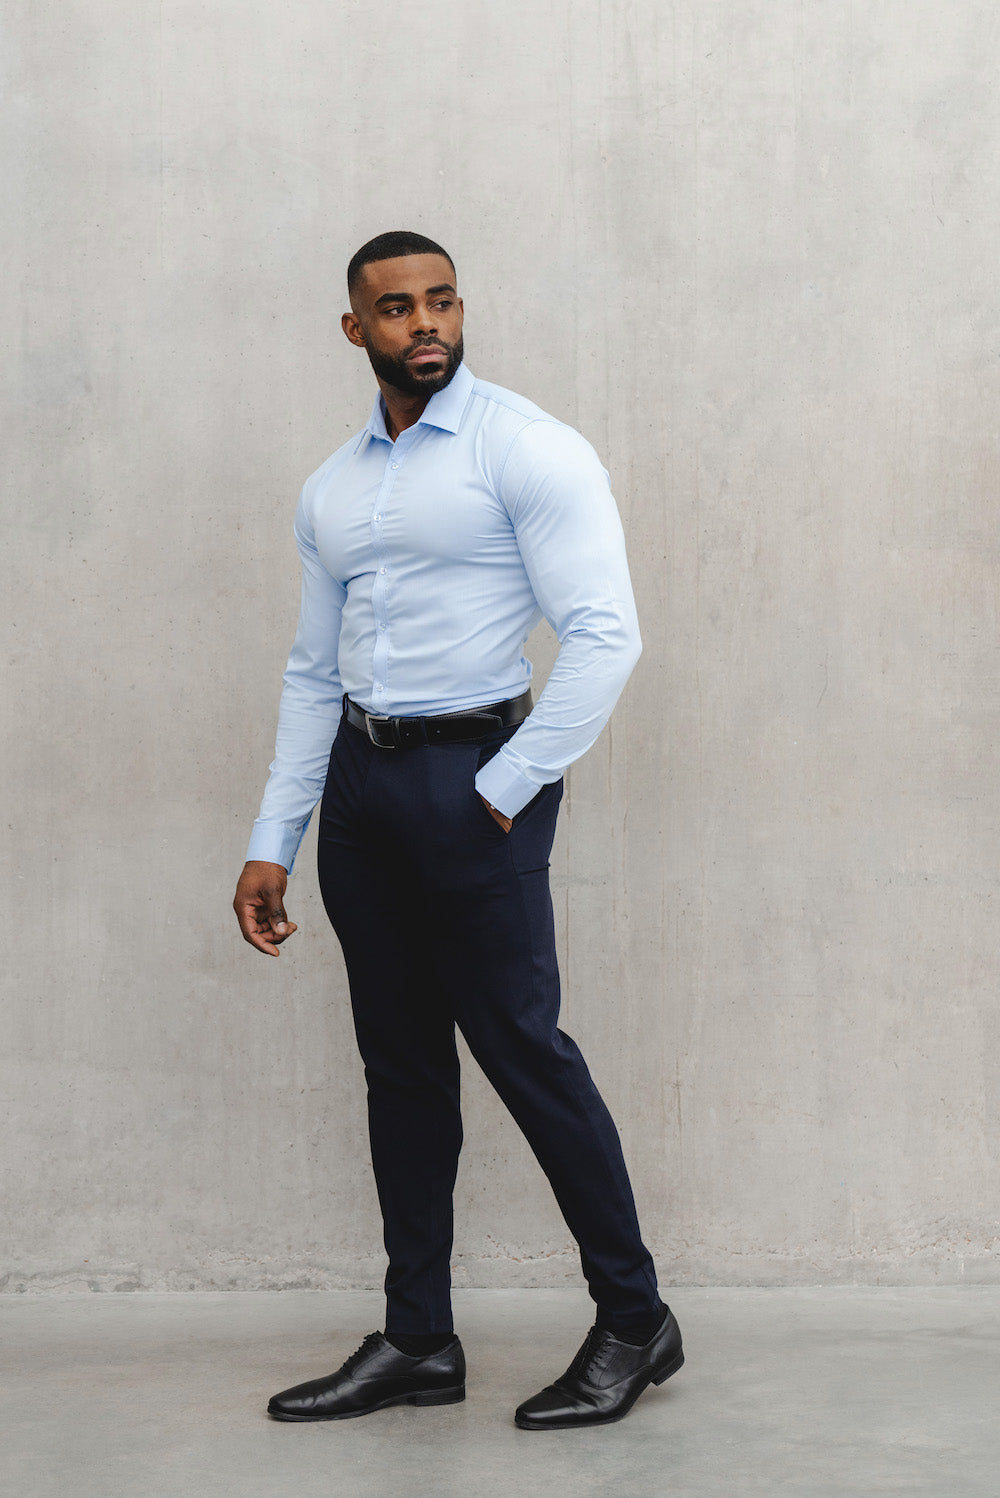 What colour pants go well with a light blue shirt for men? - Quora